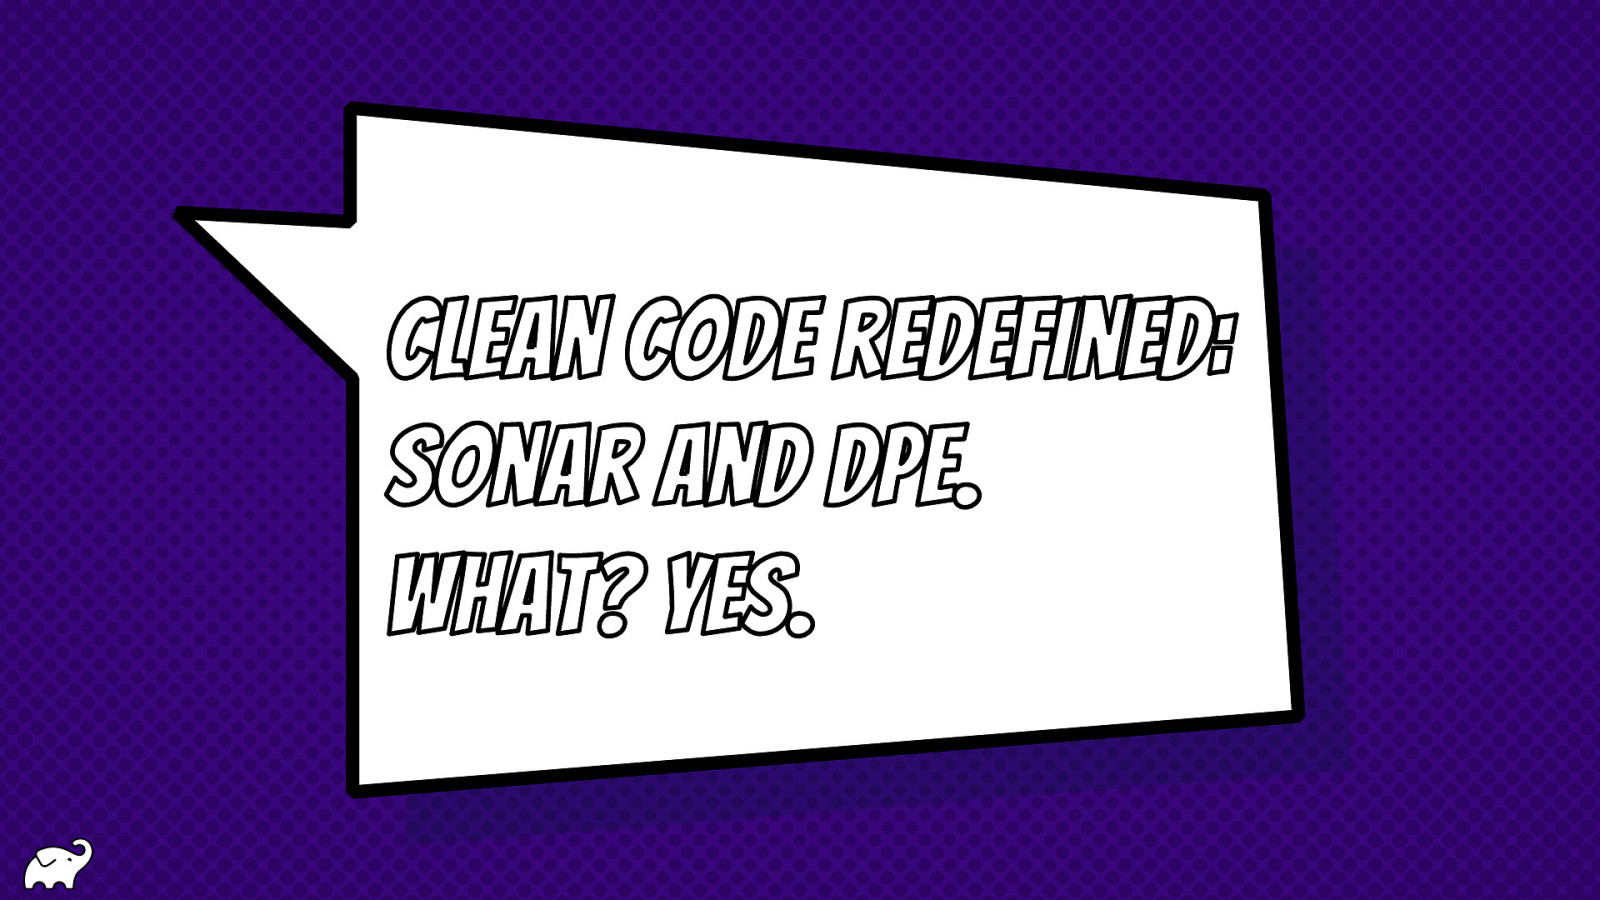 Clean Code redefined: sonar and dpe. What? Yes.